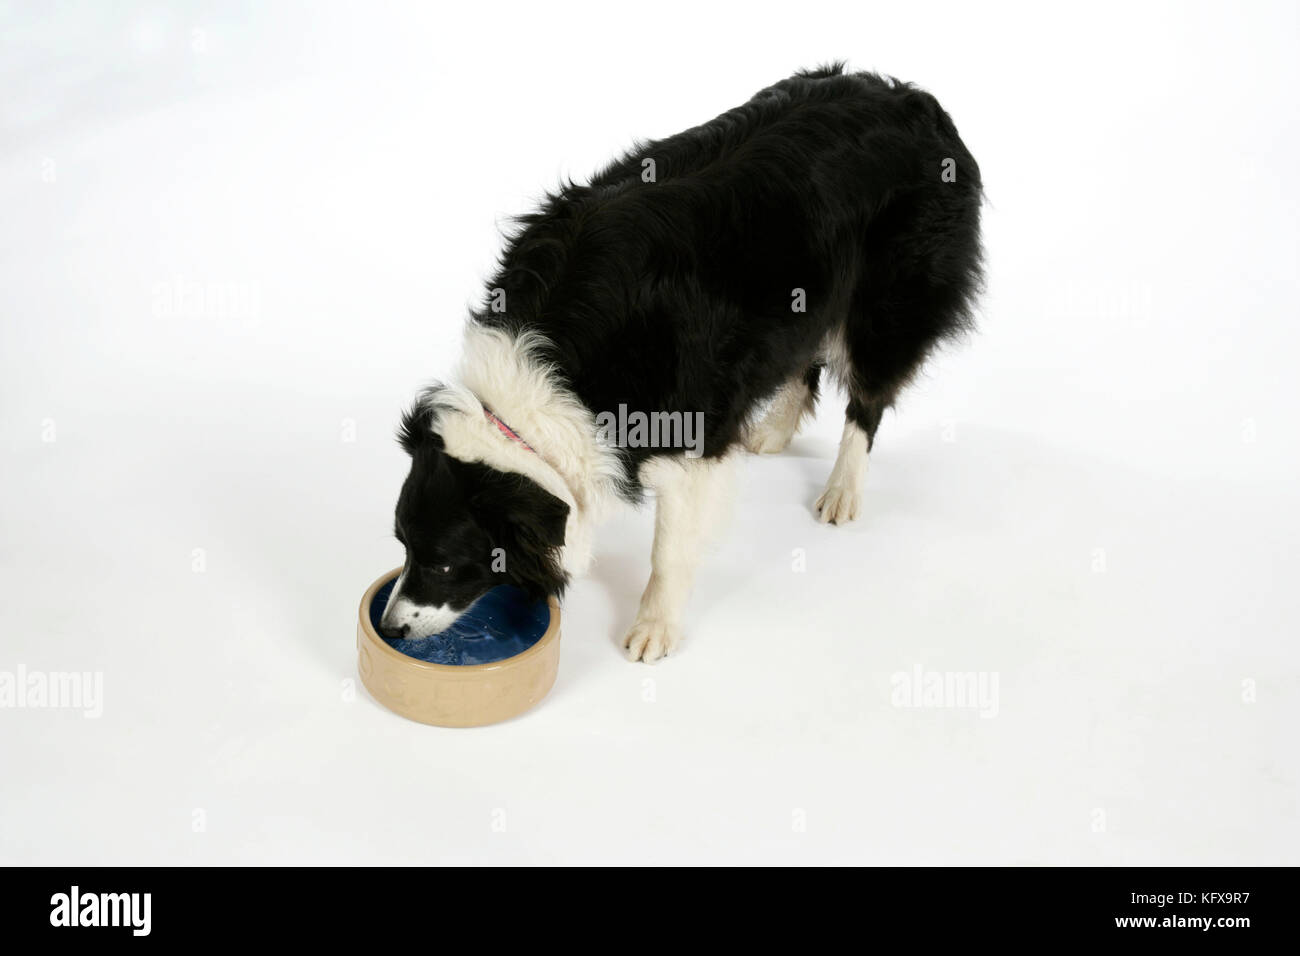 DOG - Border Collie drinking water from a bowl Stock Photo